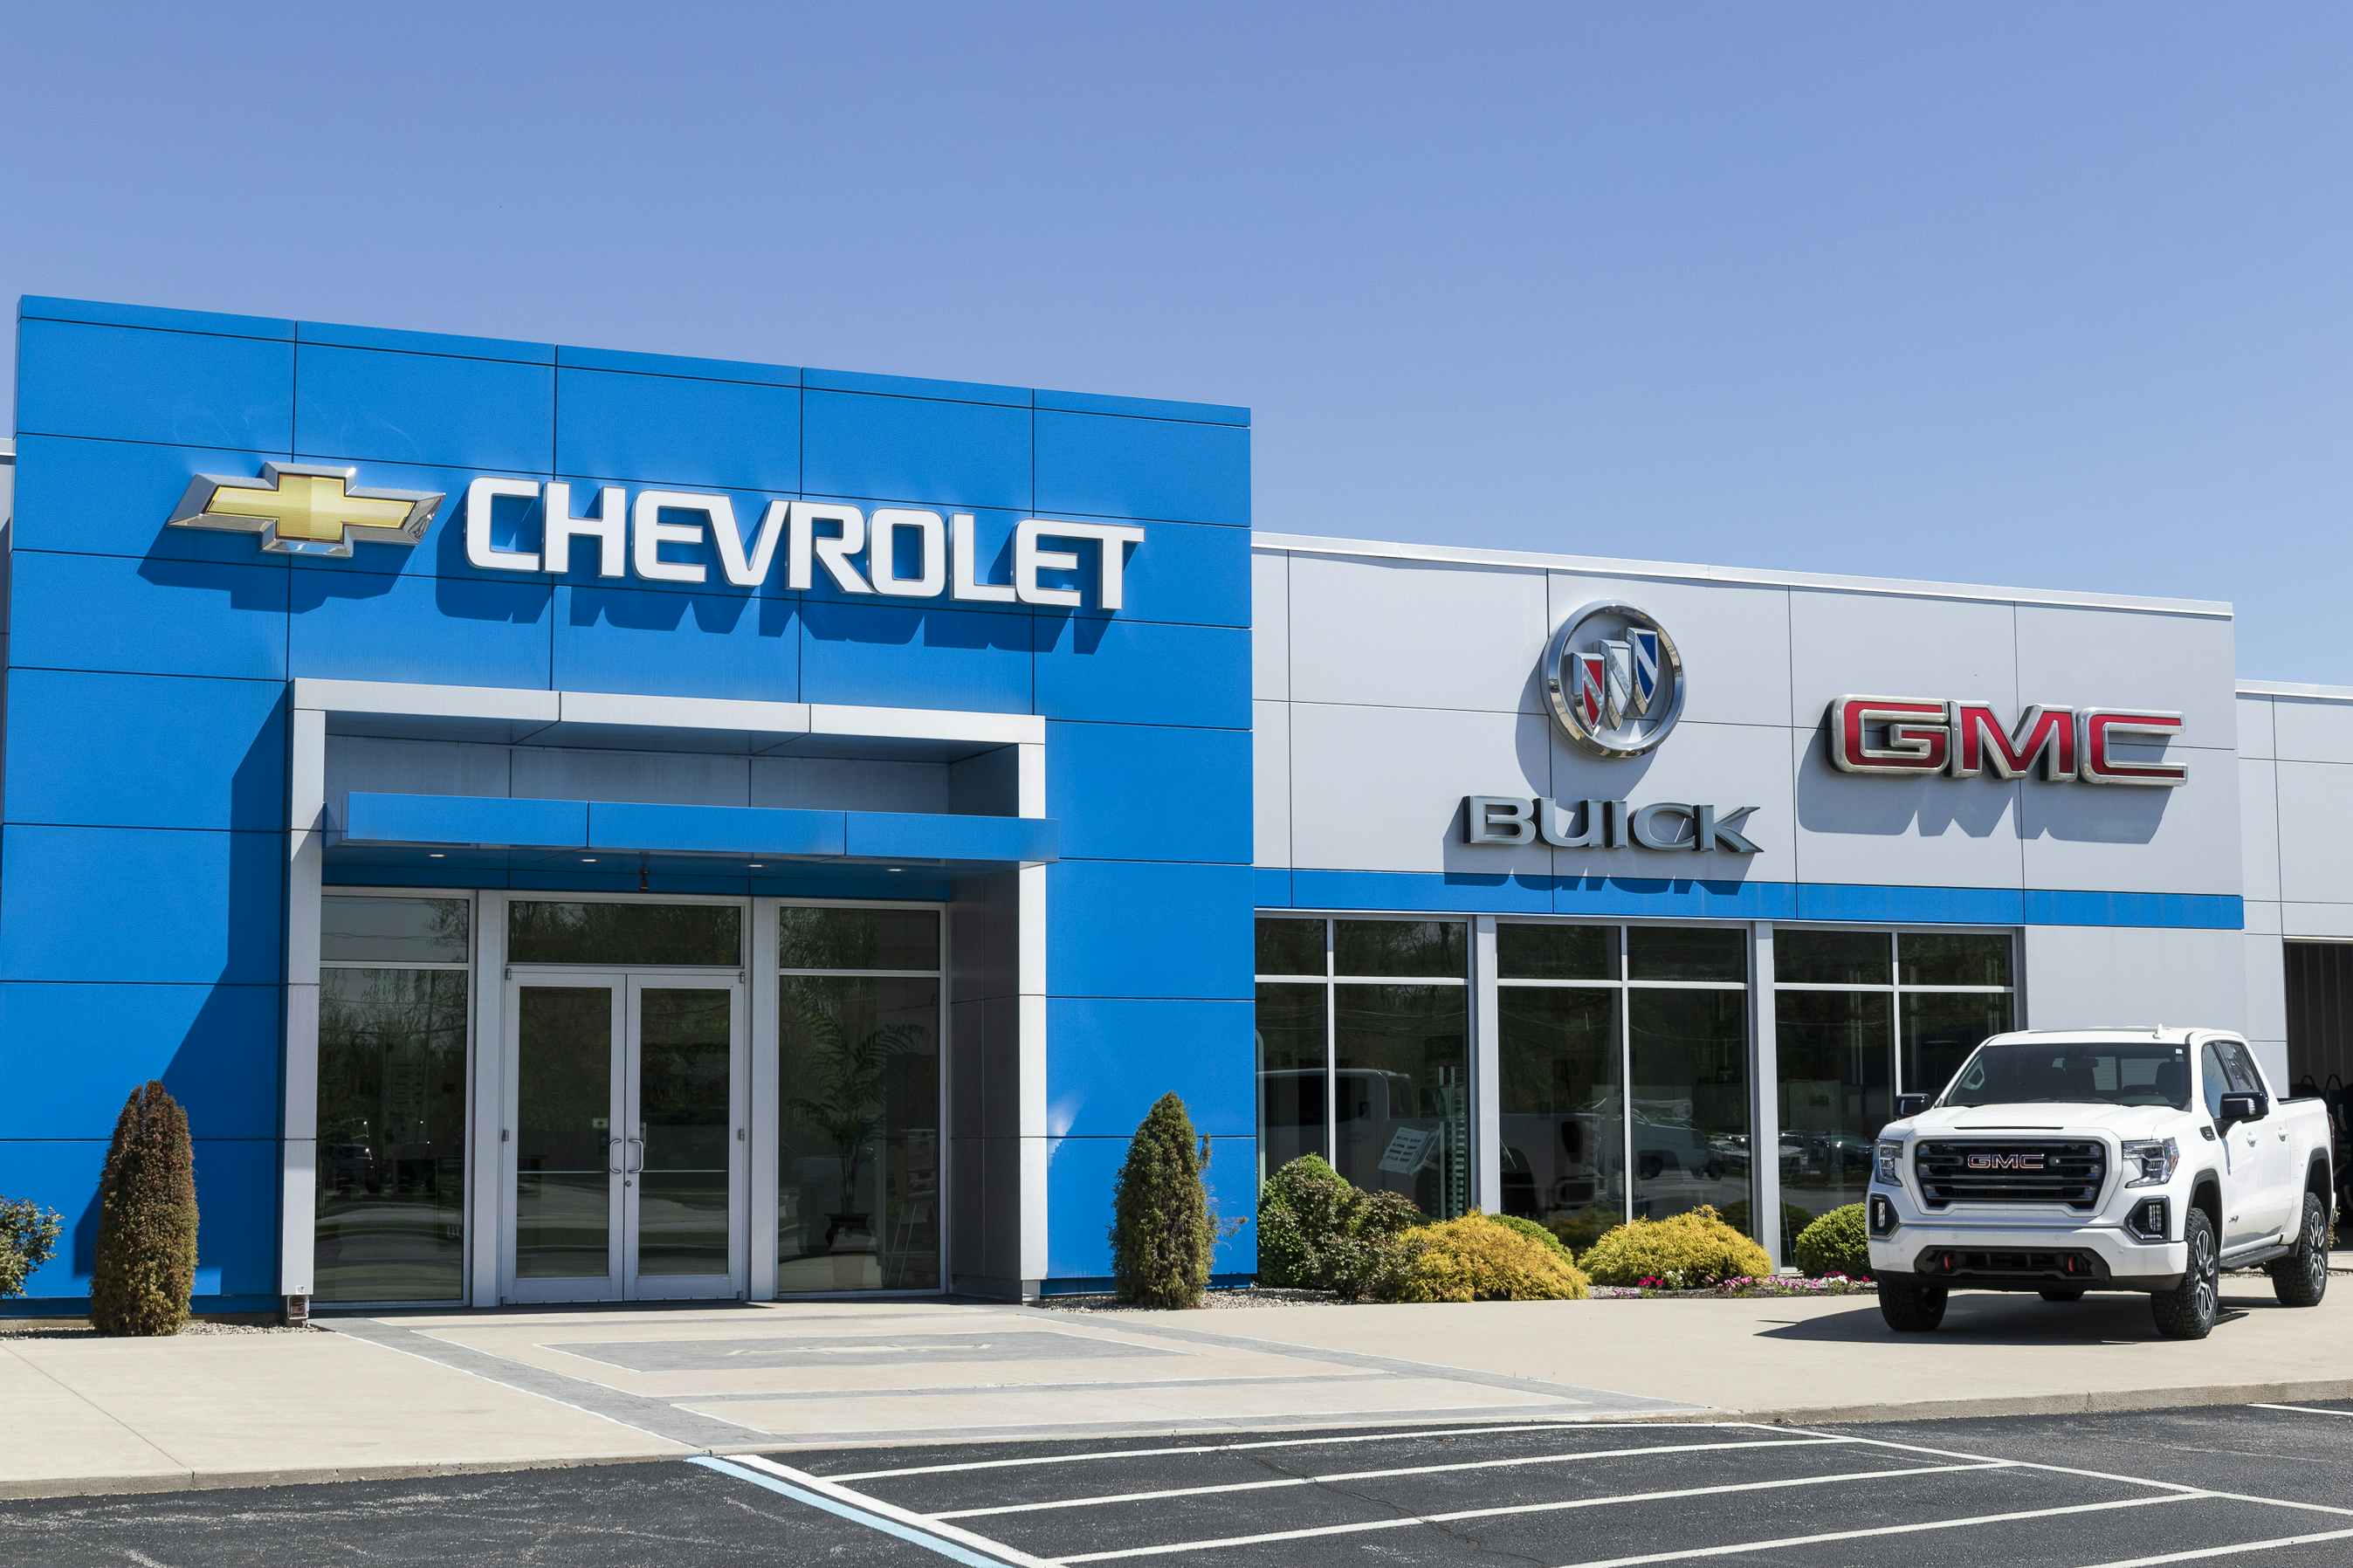 A Chevrolet, Buick, and GMC dealership with a truck parked out front